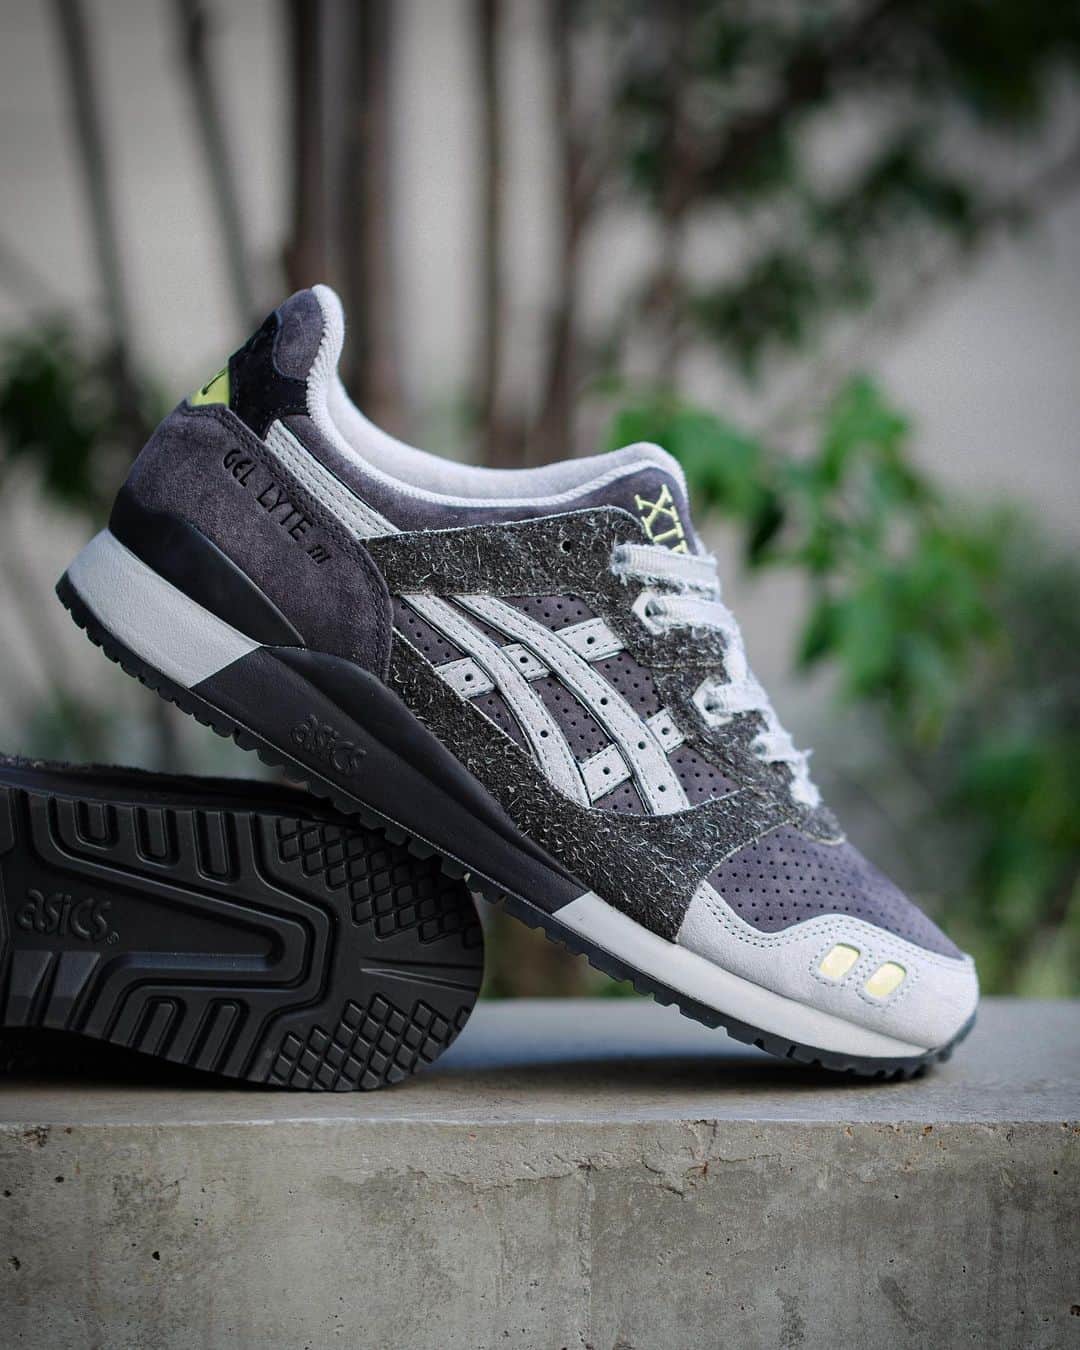 アトモスさんのインスタグラム写真 - (アトモスInstagram)「. asics GEL-LYTE III OG  ハロウィンにまつわるさまざまな迷信からインスピレーションを受けたGEL-LYTE III OGが登場。 ASICSのアイコニックなスニーカーGEL-LYTE III OGのディテールにハロウィン要素を落とし込み、アッパーはグレーヘアリースウェードとファントムのスウェードで構築し、タン部分にXIIIの刺繍を施しています。 かかと部にはGELテクノロジーが組み込まれ、衝撃緩衝性と快適な履き心地をサポート。ベロ部分を縦に大きく2分割したスプリットタンが特徴的で、甲部分を包み込みフィットするため足入れ感が良く、履いている時もベロ部がずれにくい設計となっています。 本商品はは10月6日(金)よりatmos-tokyo.comにて抽選受付開始。10月13日(金)よりatmos各店（一部店舗除く）、atmosオンラインにて展開予定。  Introducing GEL-LYTE III OG, inspired by various superstitions related to Halloween. Incorporating Halloween elements into the details of ASICS' iconic sneaker GEL-LYTE III OG, the upper is constructed from gray hairy suede and phantom suede, with XIII embroidered on the tongue. GEL technology is incorporated in the heel to support shock absorption and comfort. They are characterized by a split tongue that divides the tongue into two vertically, and it wraps around the instep for a comfortable fit, and the tongue is designed to prevent it from slipping when you are wearing it. This product will be available for lottery at atmos-tokyo.com from October 6th (Friday). Scheduled to be available at atmos stores (excluding some stores) and atmos online from October 13th (Friday).  #atmos #asics」10月9日 10時04分 - atmos_japan